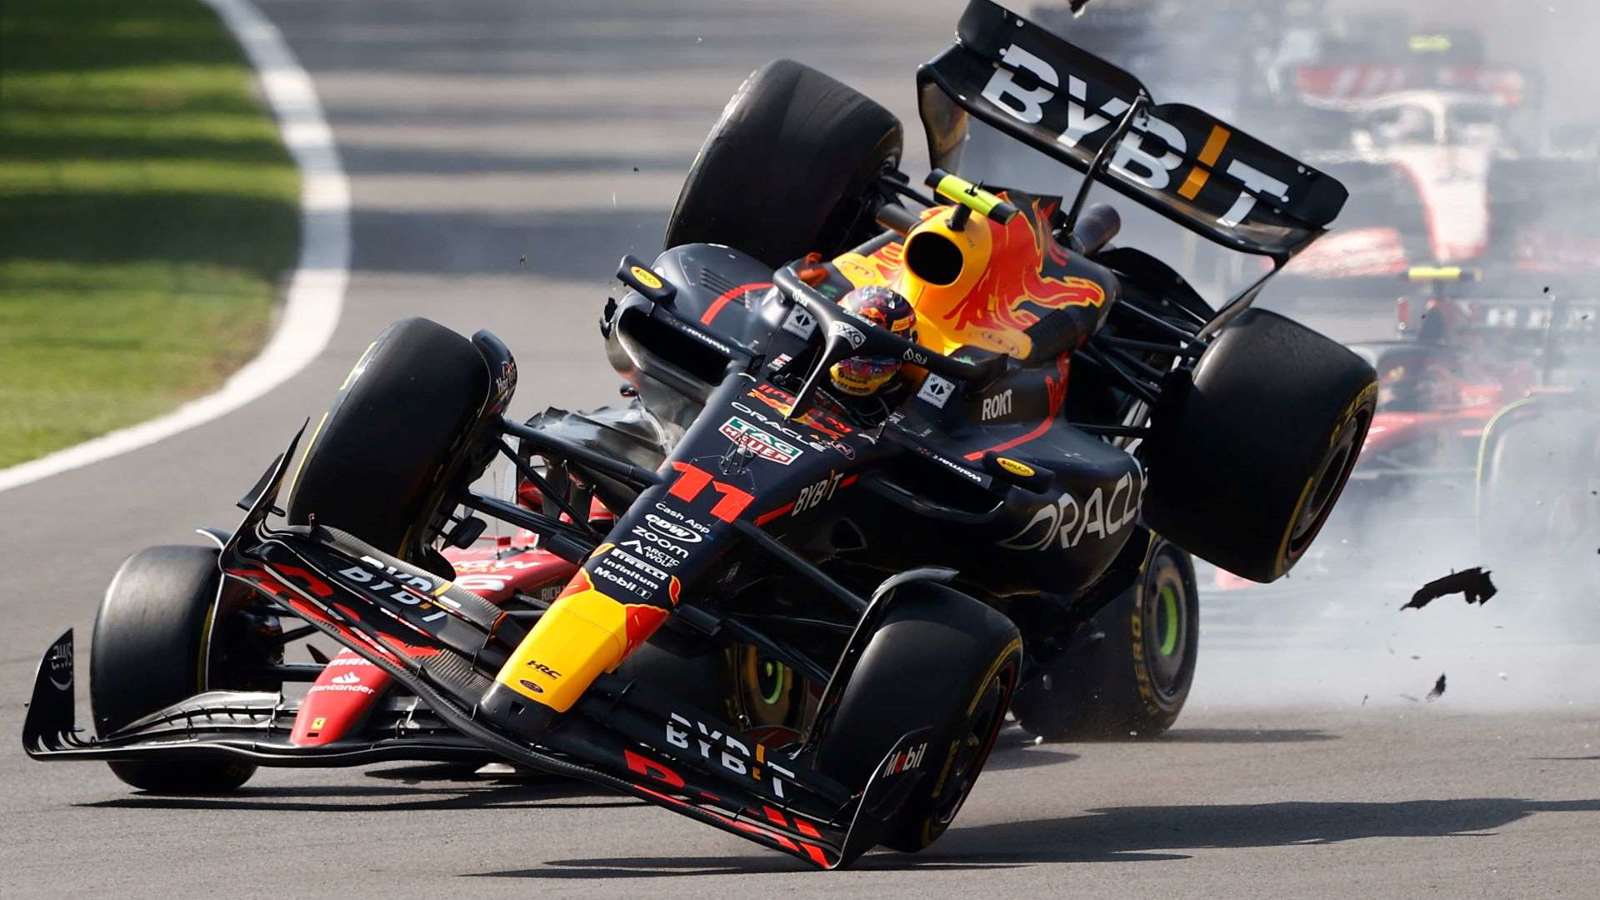 F1 needs a quick fix to stem Red Bull's dominance